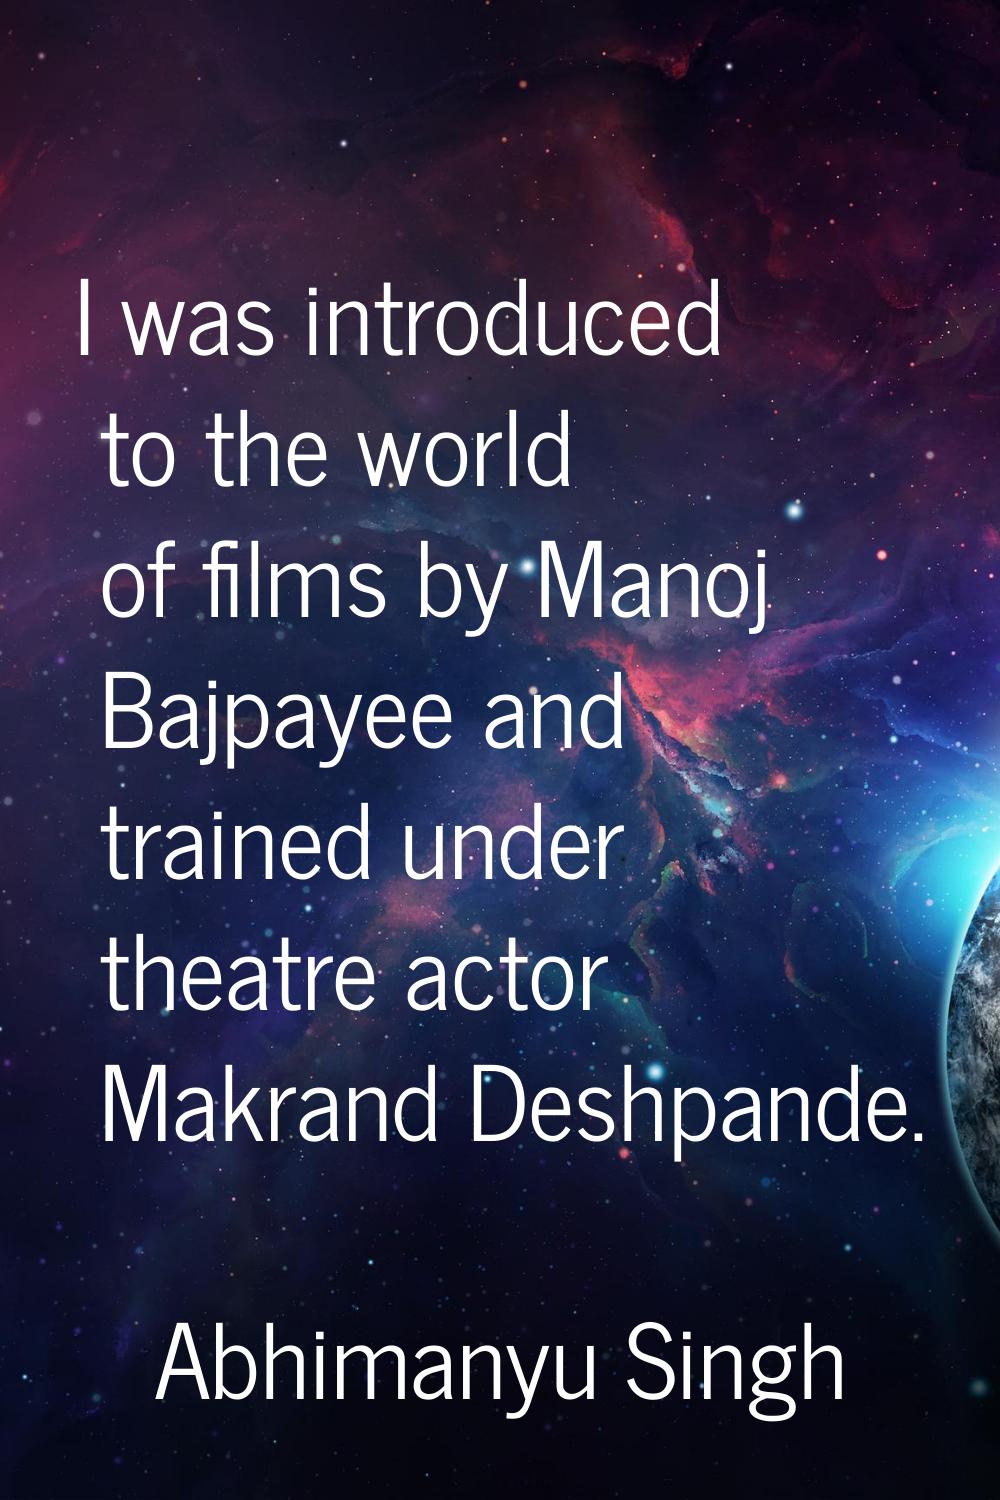 I was introduced to the world of films by Manoj Bajpayee and trained under theatre actor Makrand De